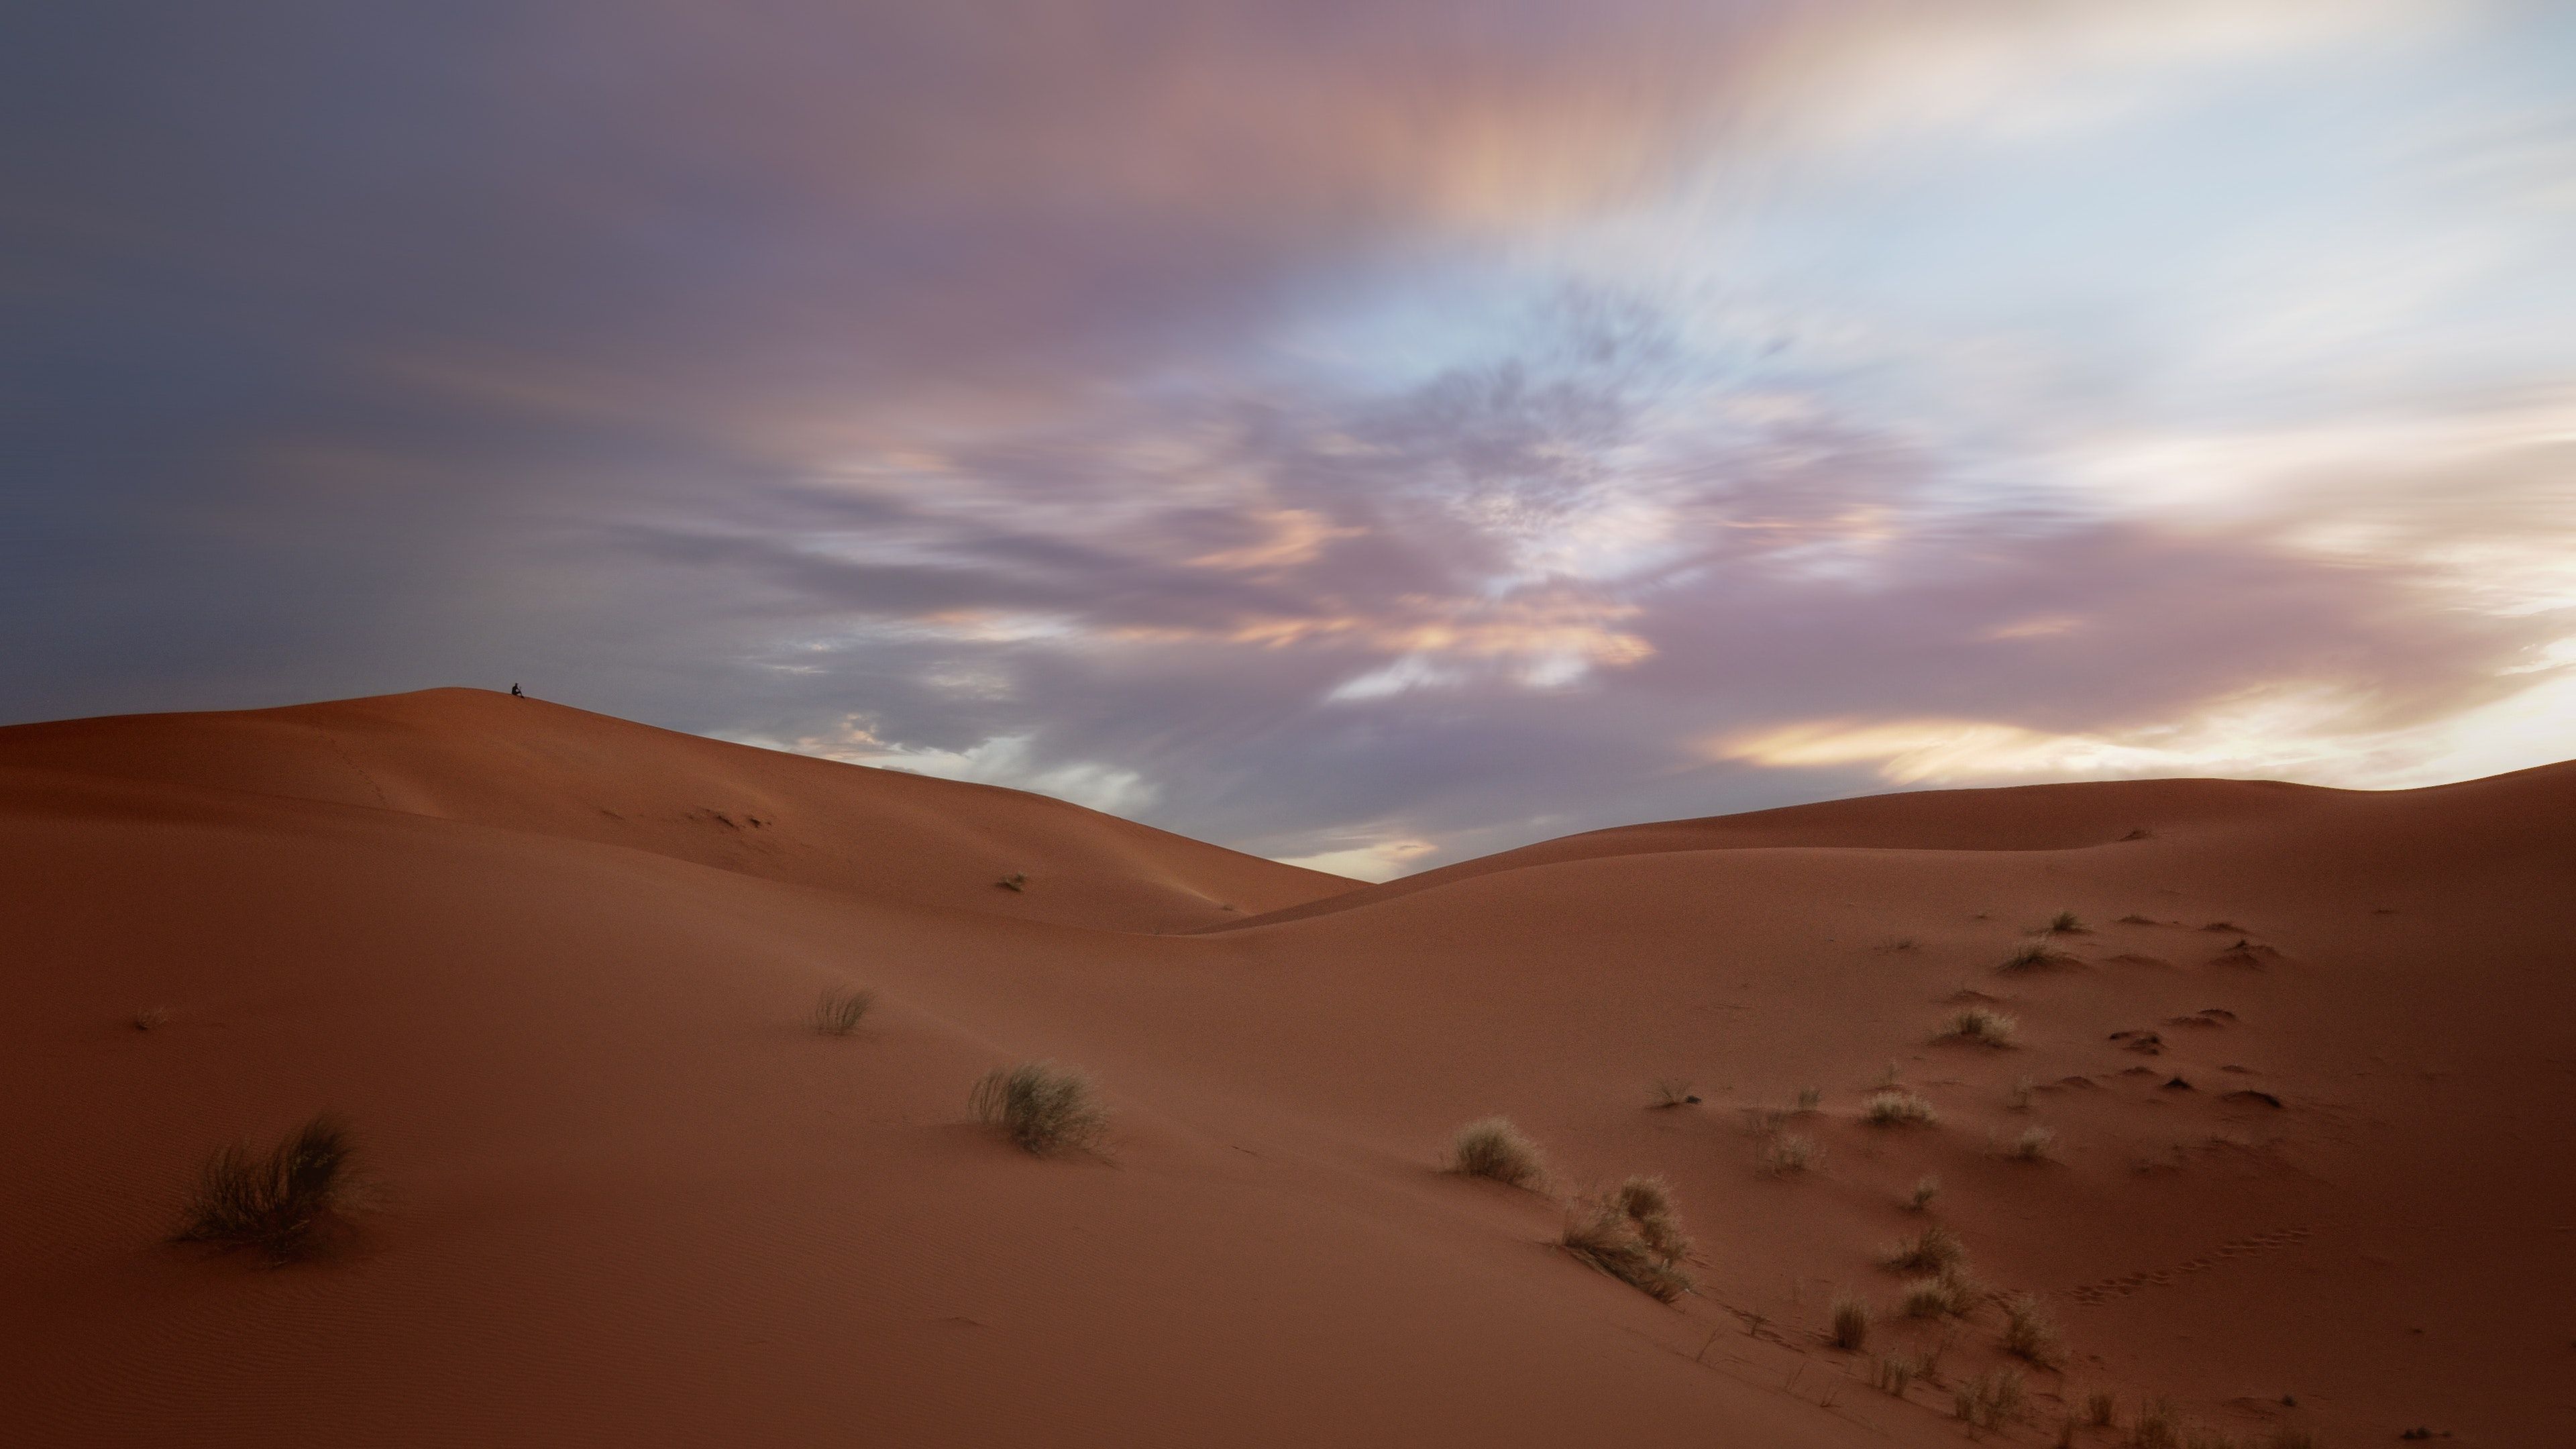 Desert 4K wallpaper for your desktop or mobile screen free and easy to download